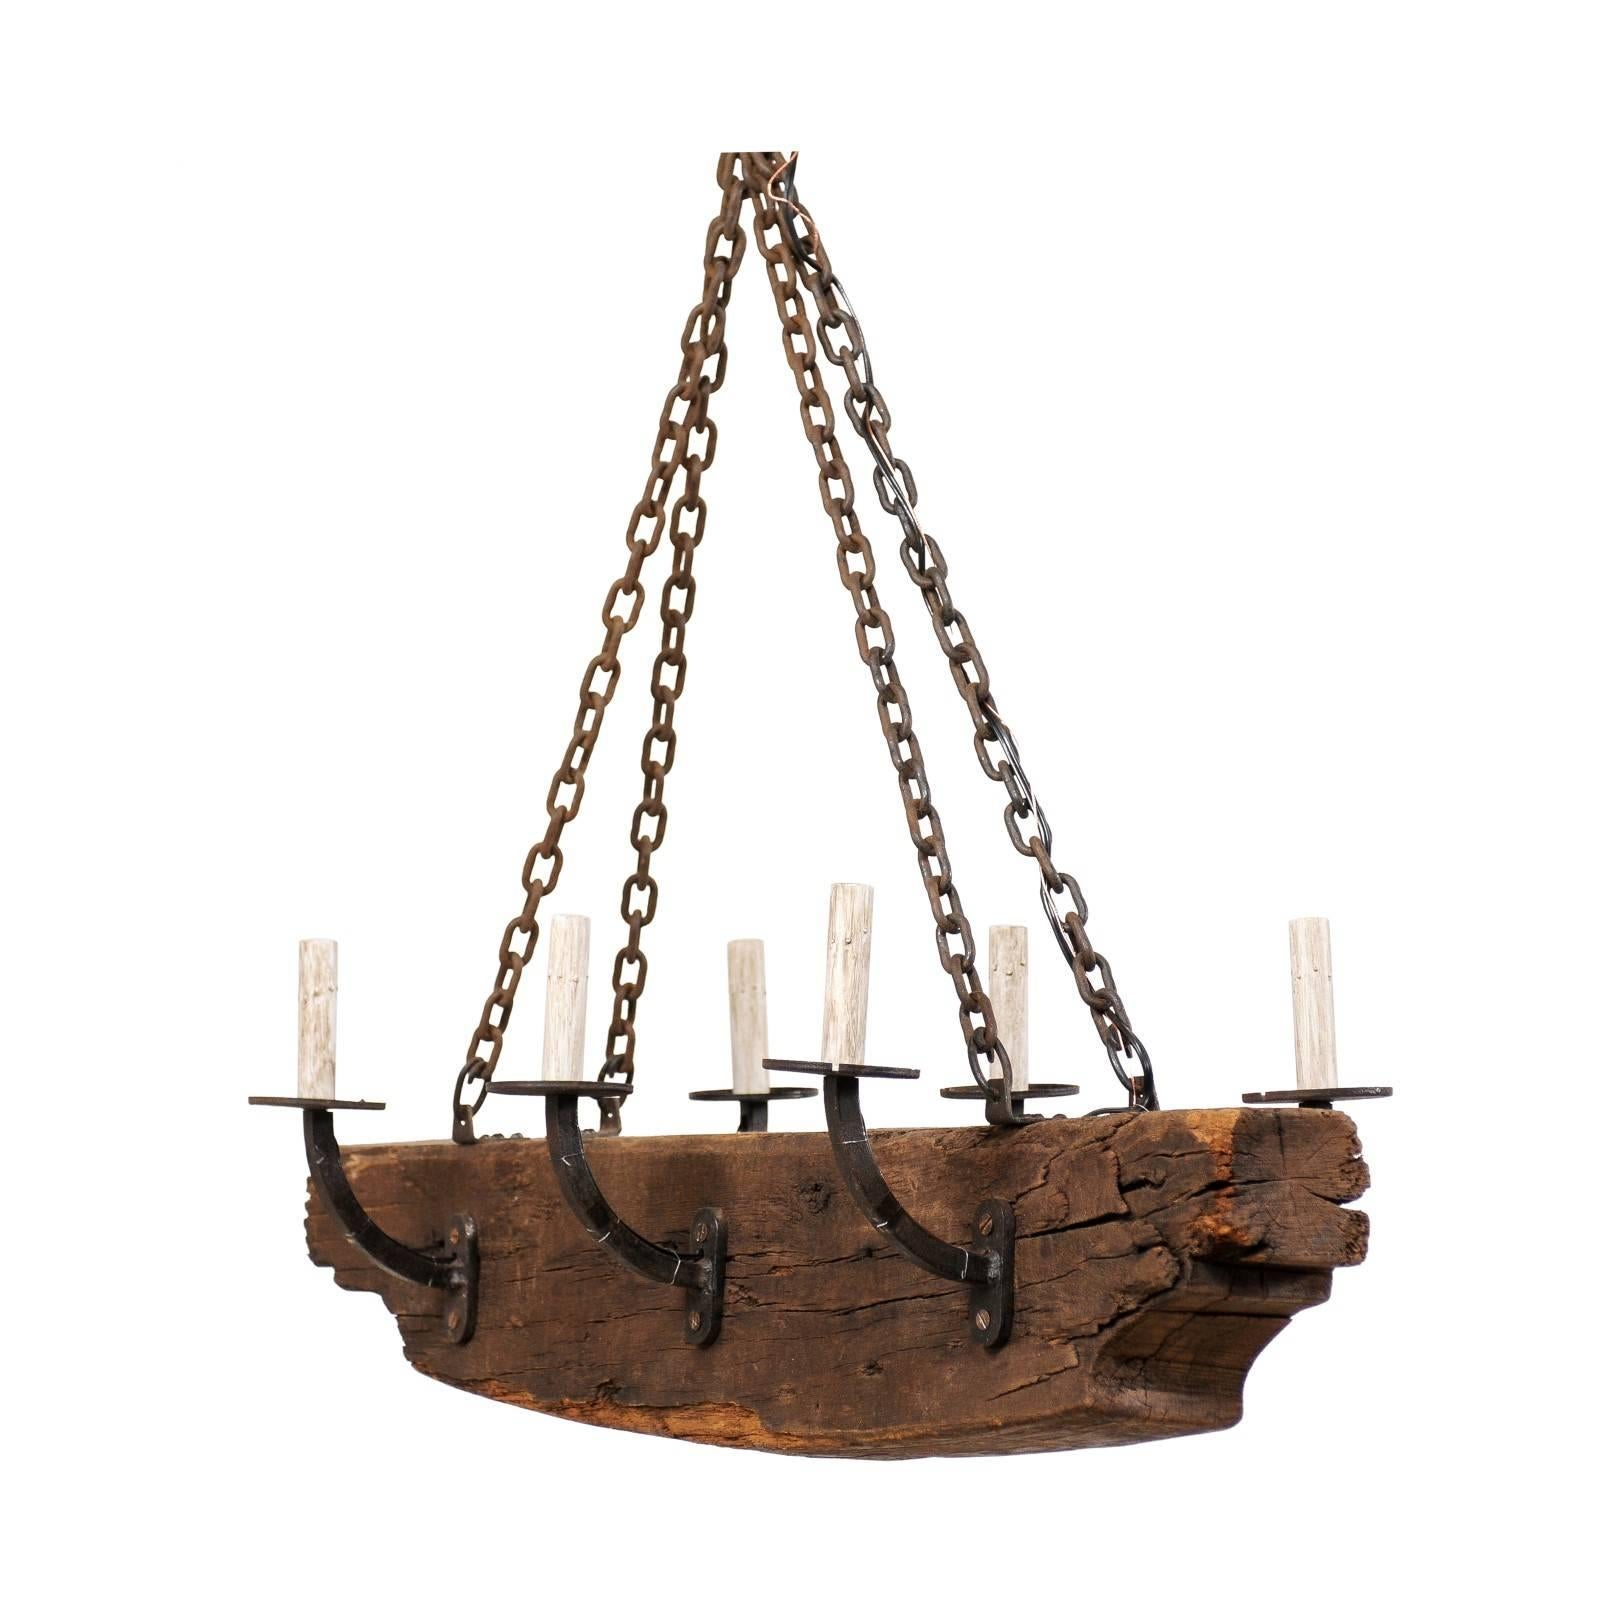 French Rustic Wood Beam Chandelier with Six Forged Iron Arms, Mid 20th C. For Sale